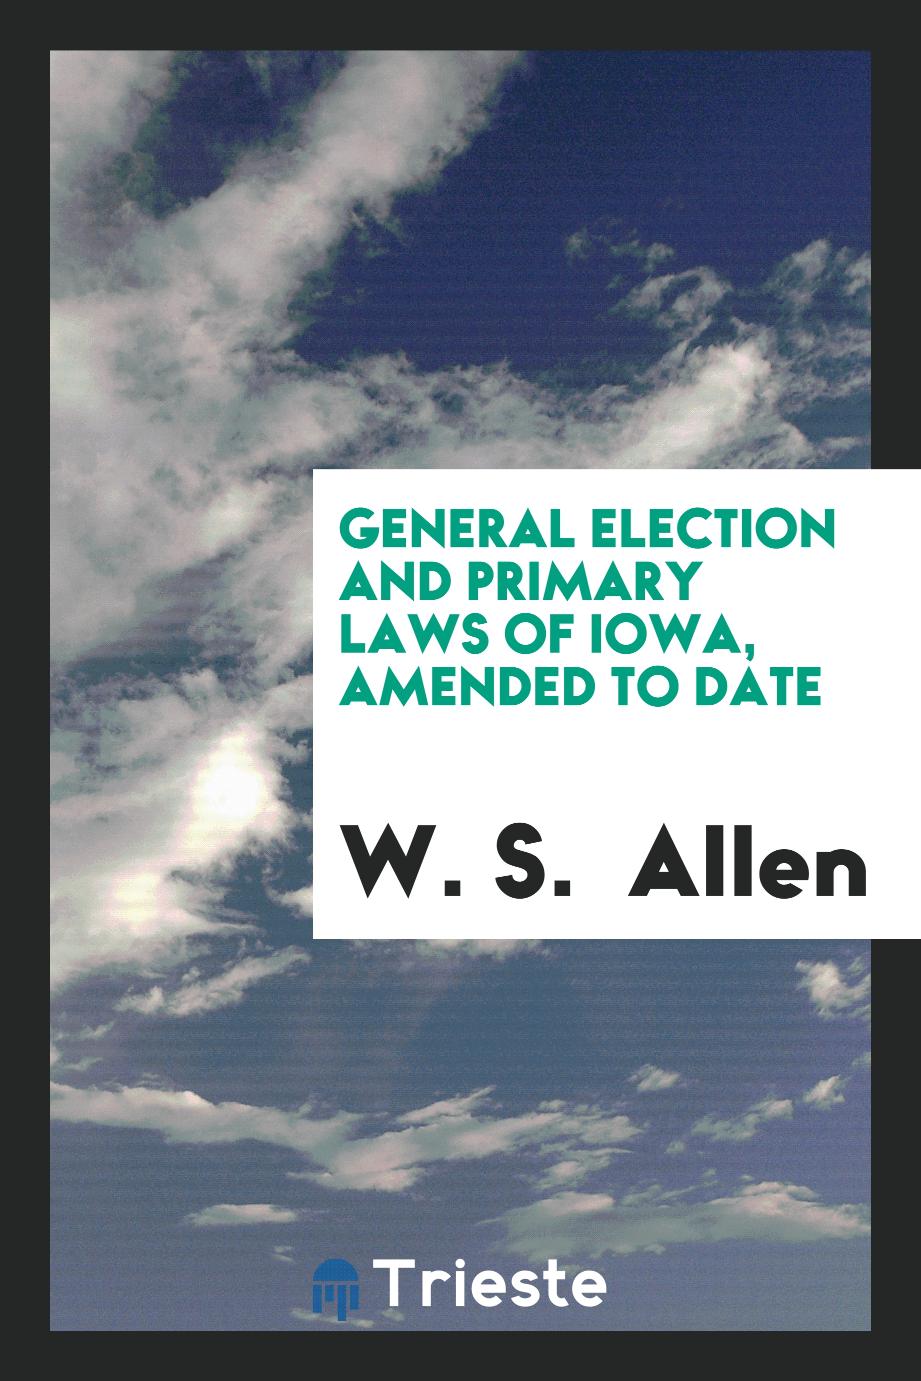 General Election and Primary Laws of Iowa, Amended to Date